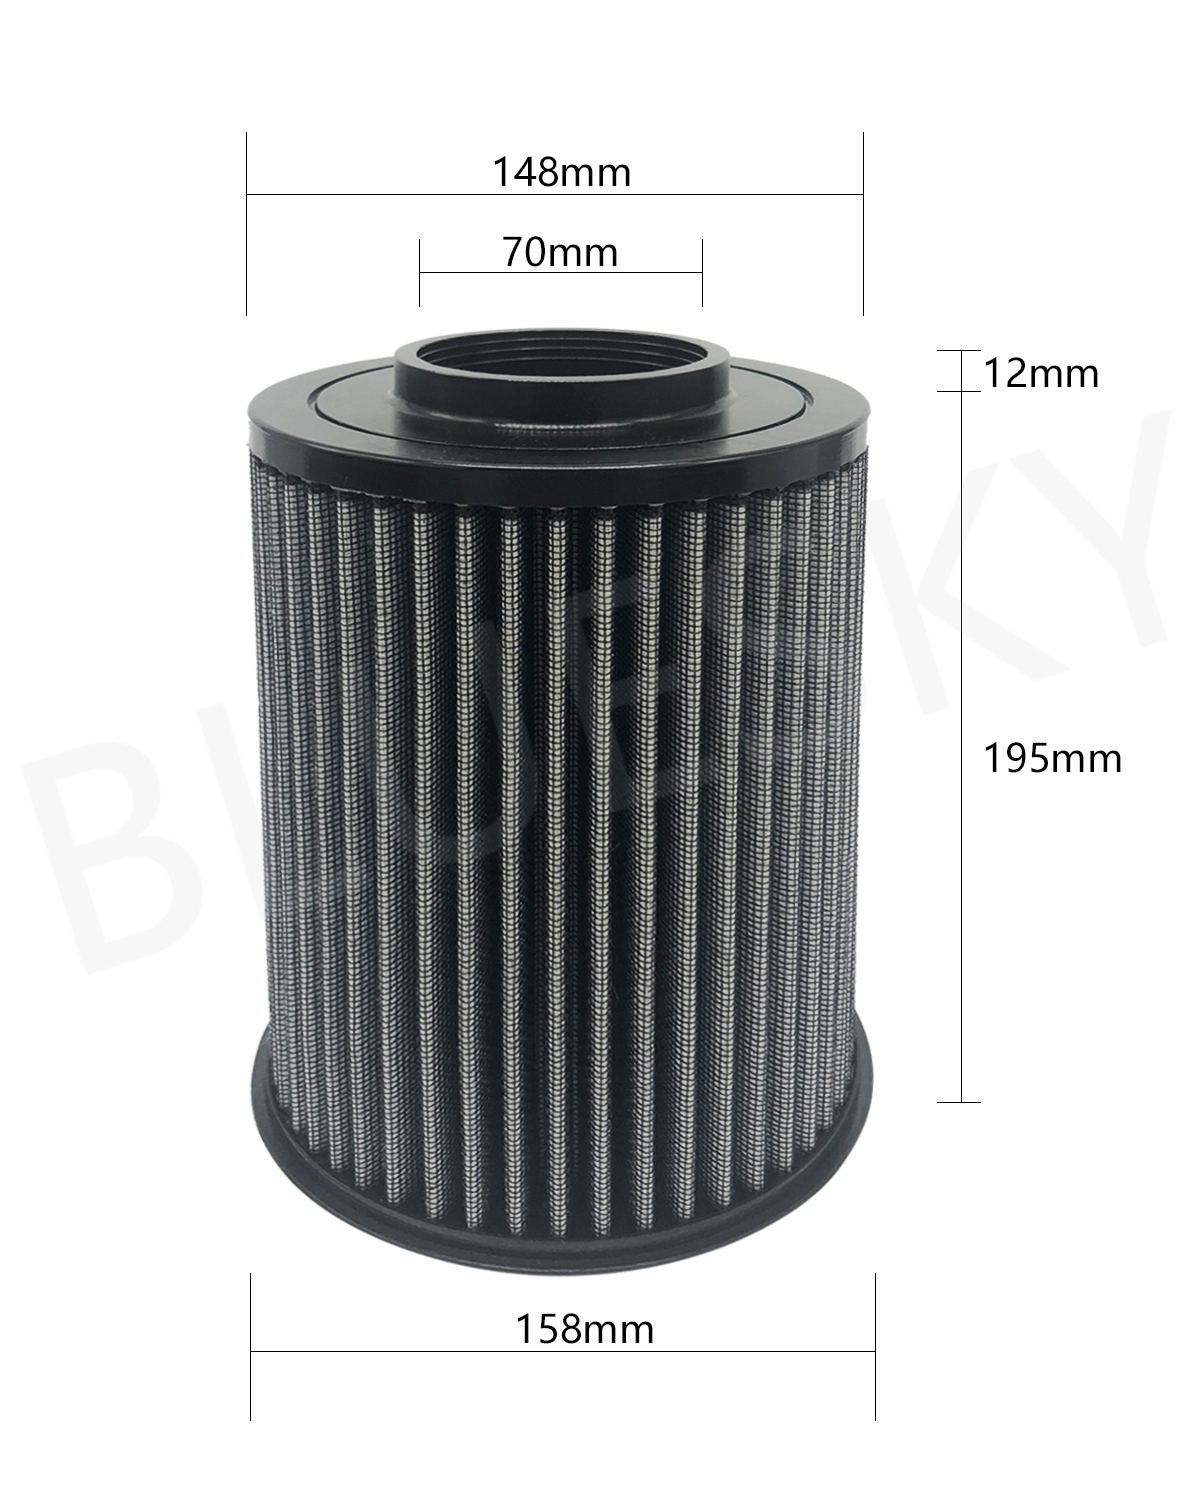 Customized High Flow Auto Air Filter for K&N E-2993 Ford Focus Car 2.0L L4 